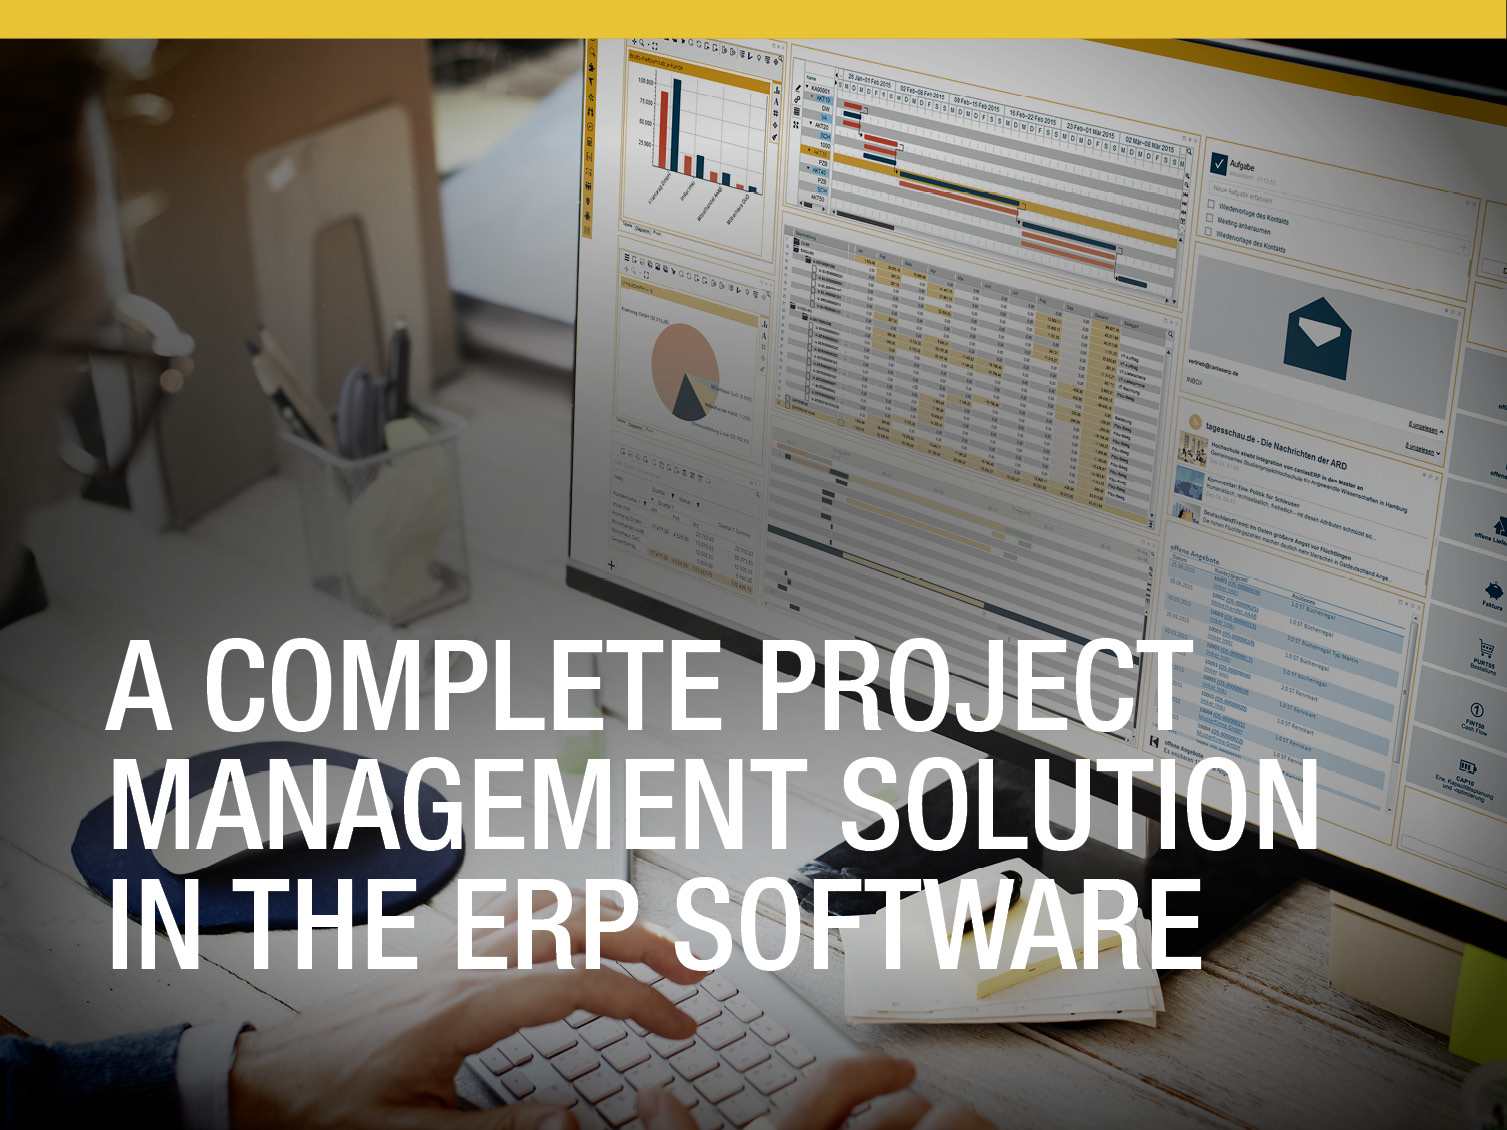 A Complete Project Management Solution in the ERP Software